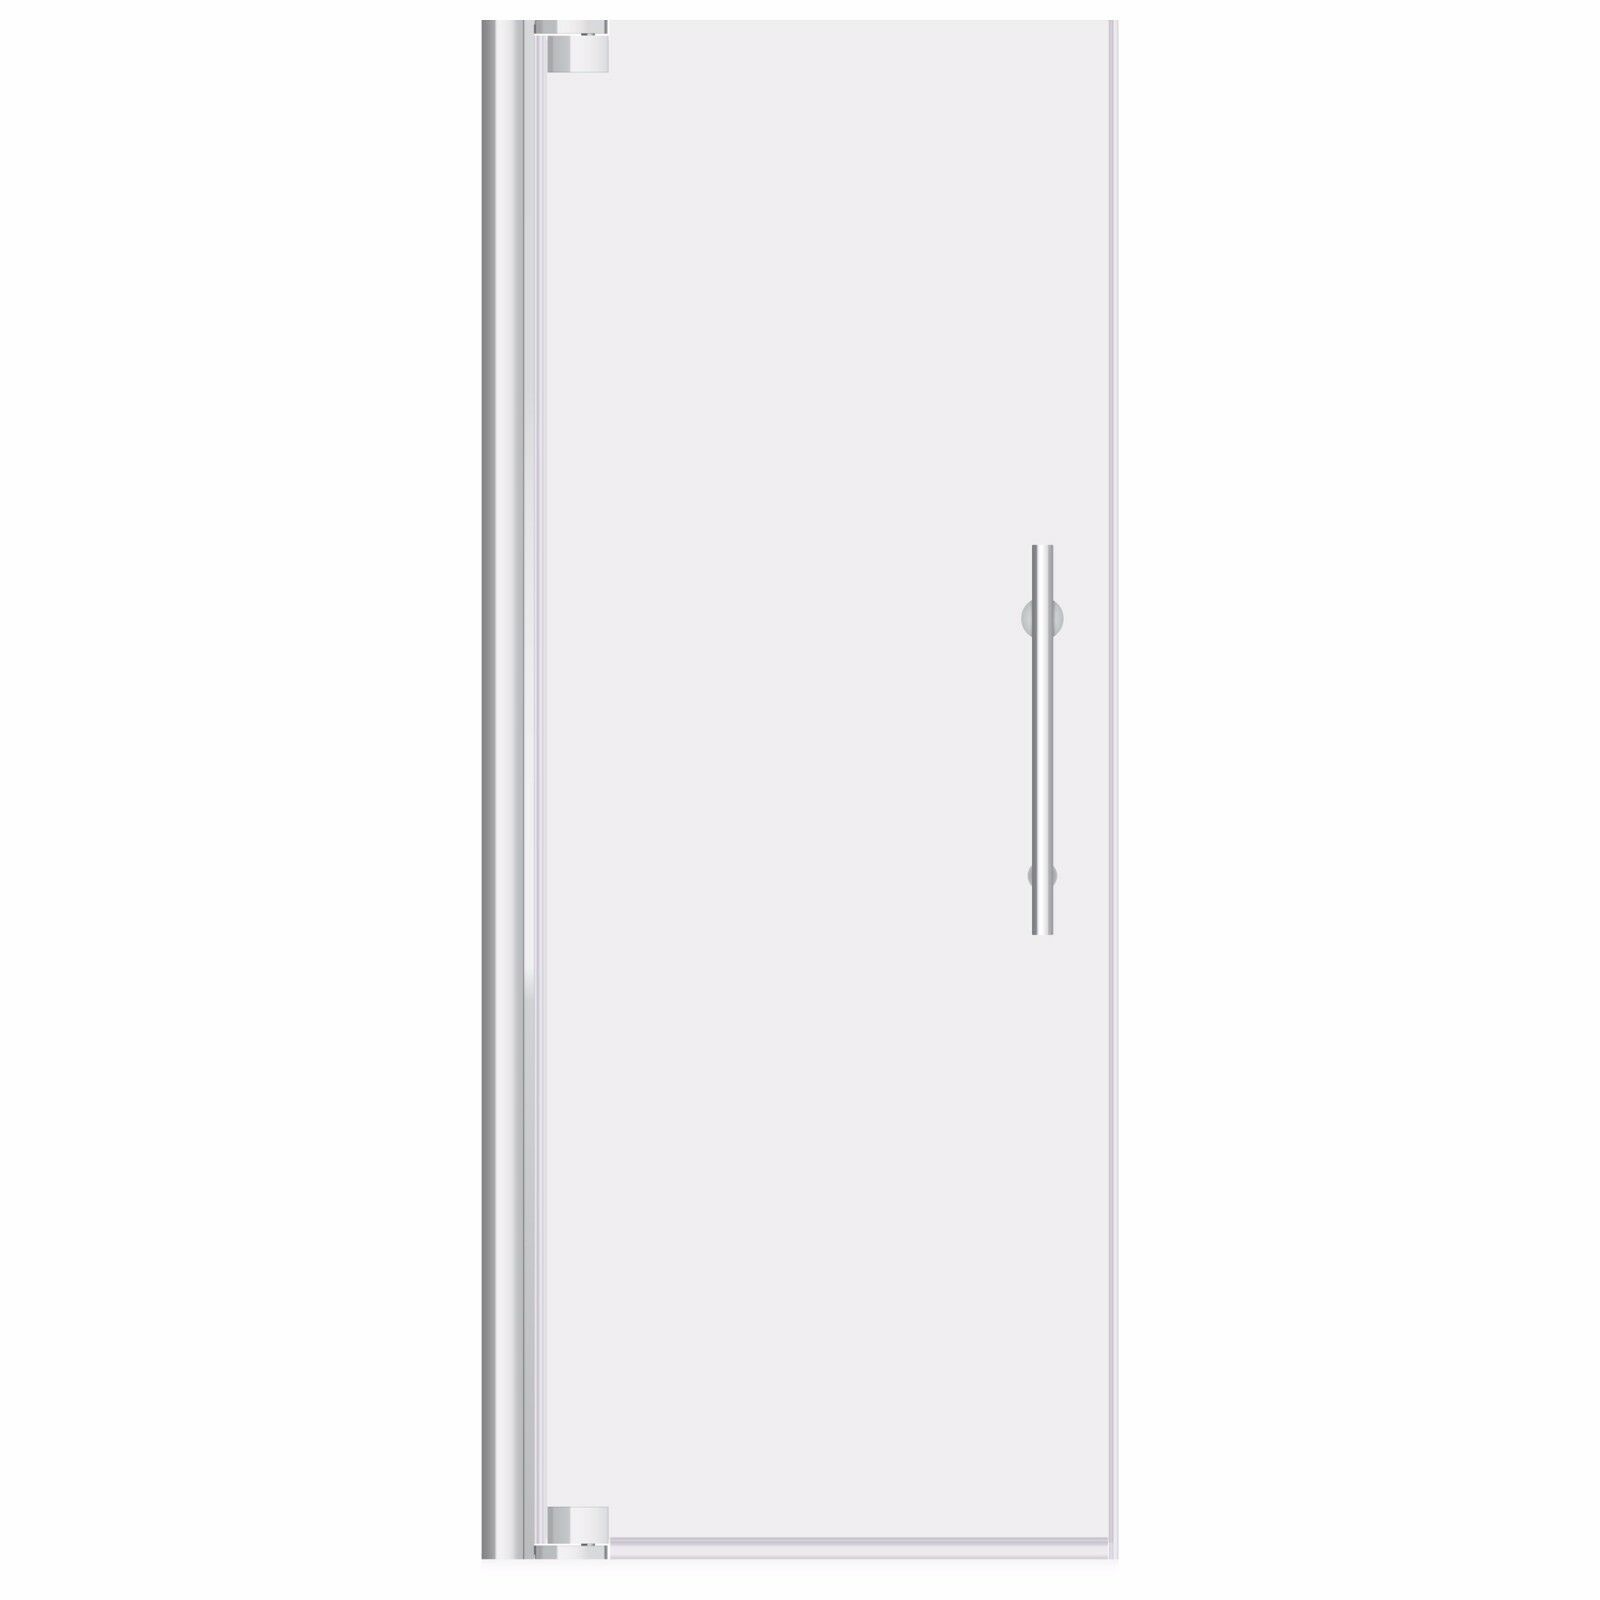 Primary image for 29-30"Wx72"H Pivot Shower Door ULTRA-G Chrome by LessCare